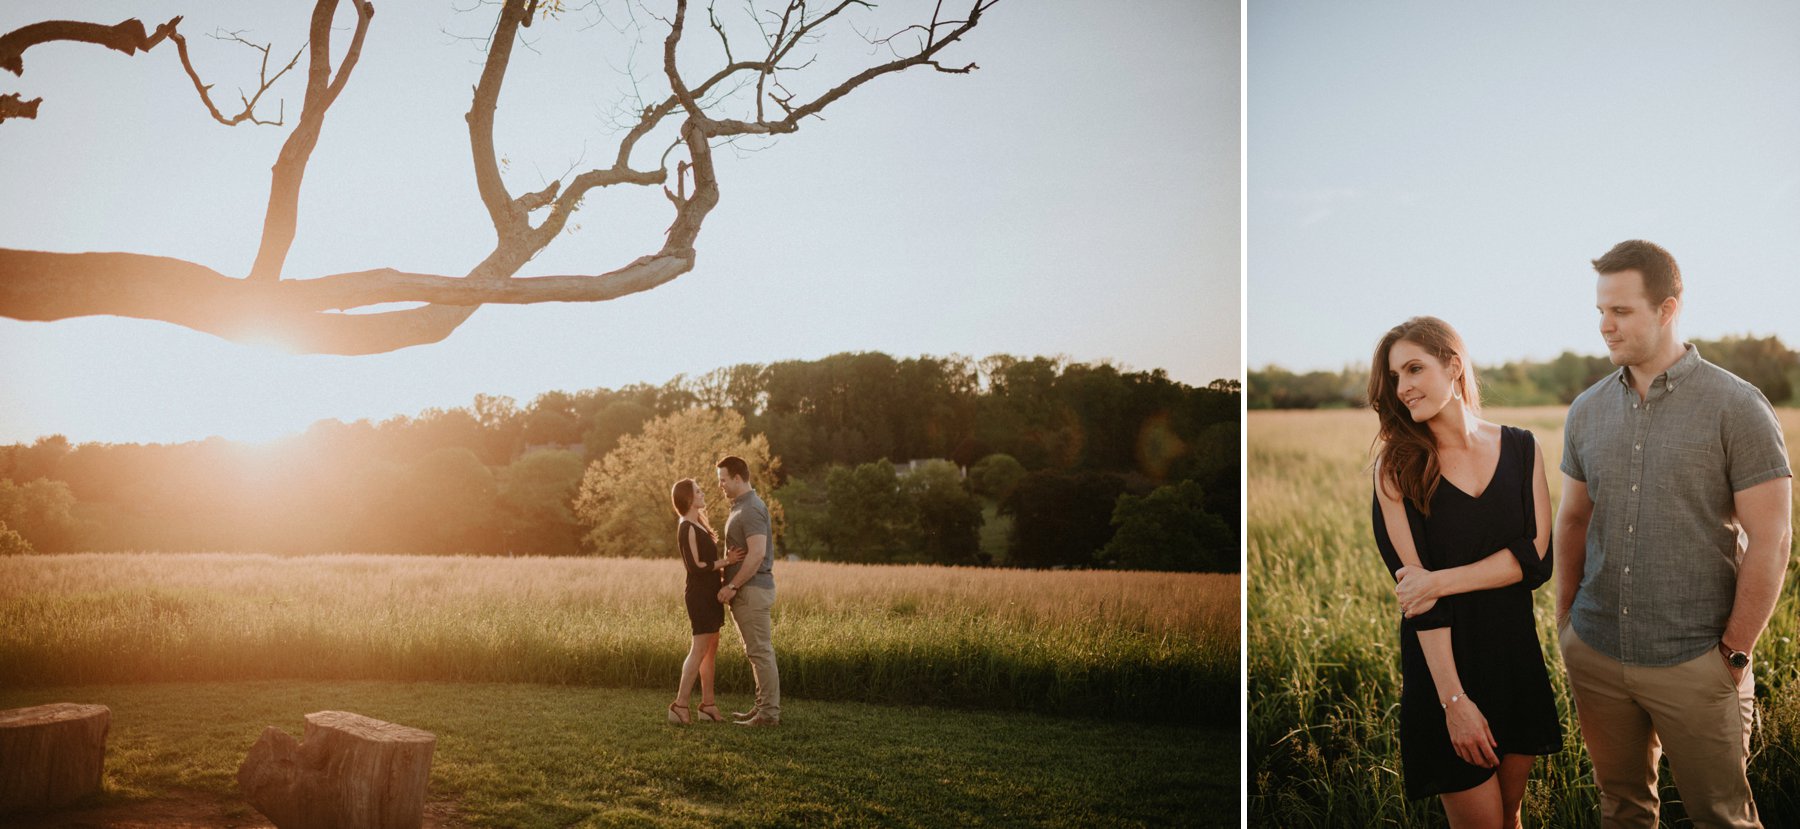 Newtown-square-engagement-session-44.jpg